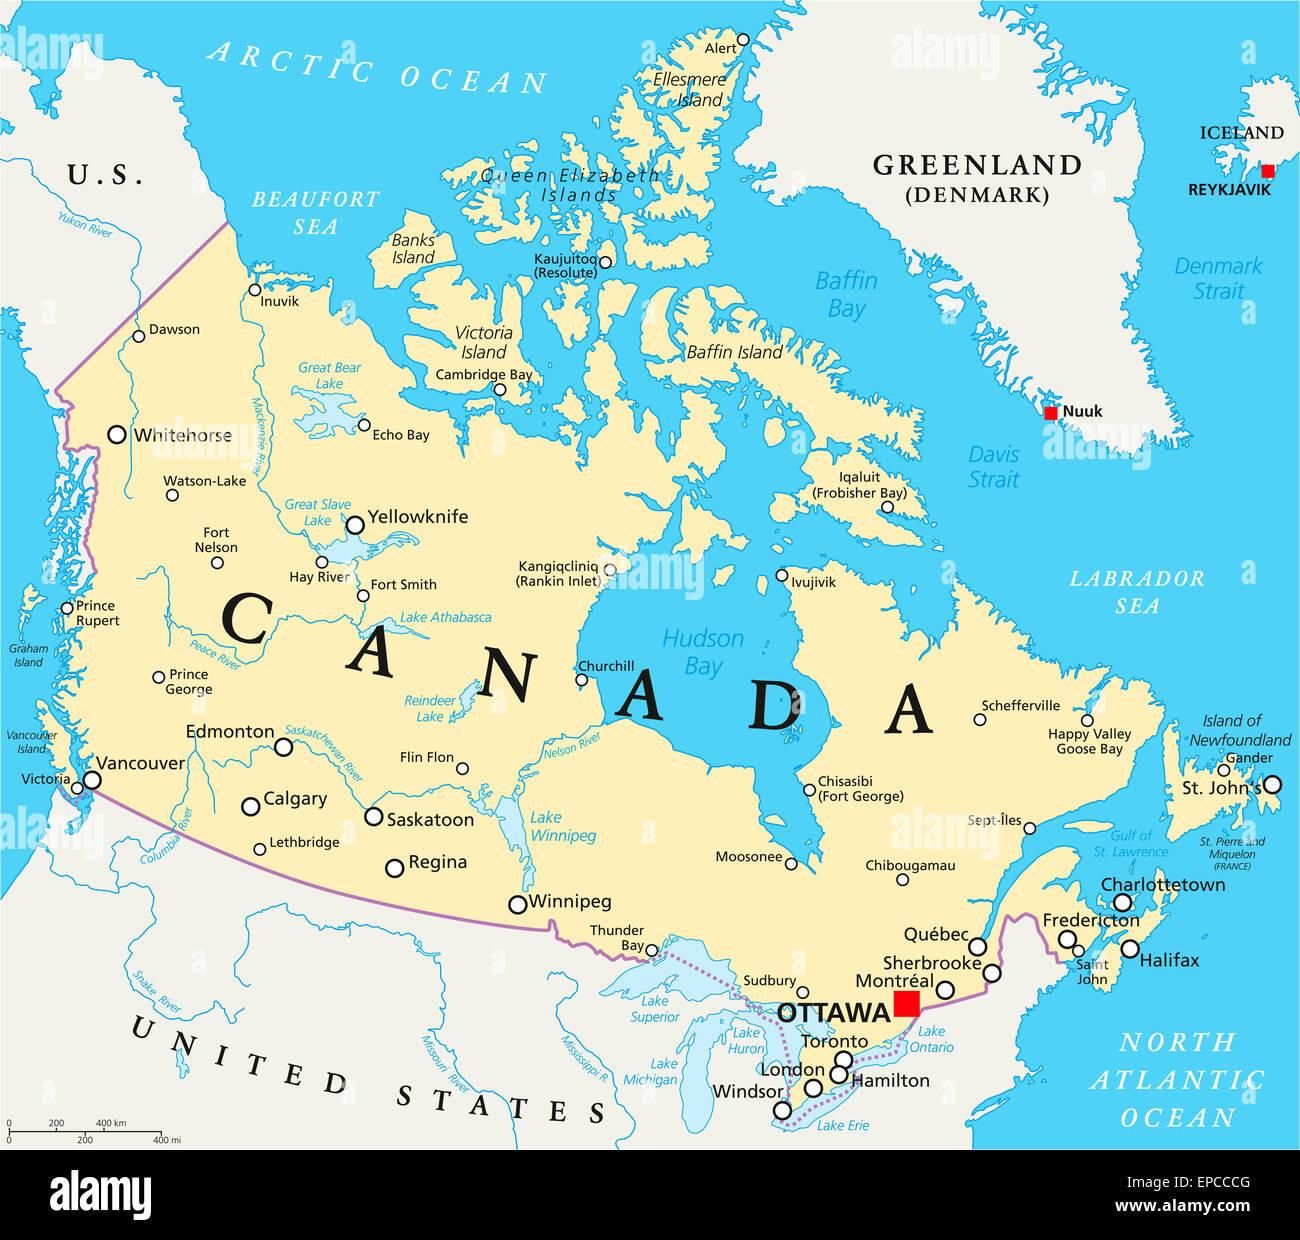 Canada Political Map with capital Ottawa, national borders, important cities, rivers and lakes. English labeling and scaling. Stock Photo